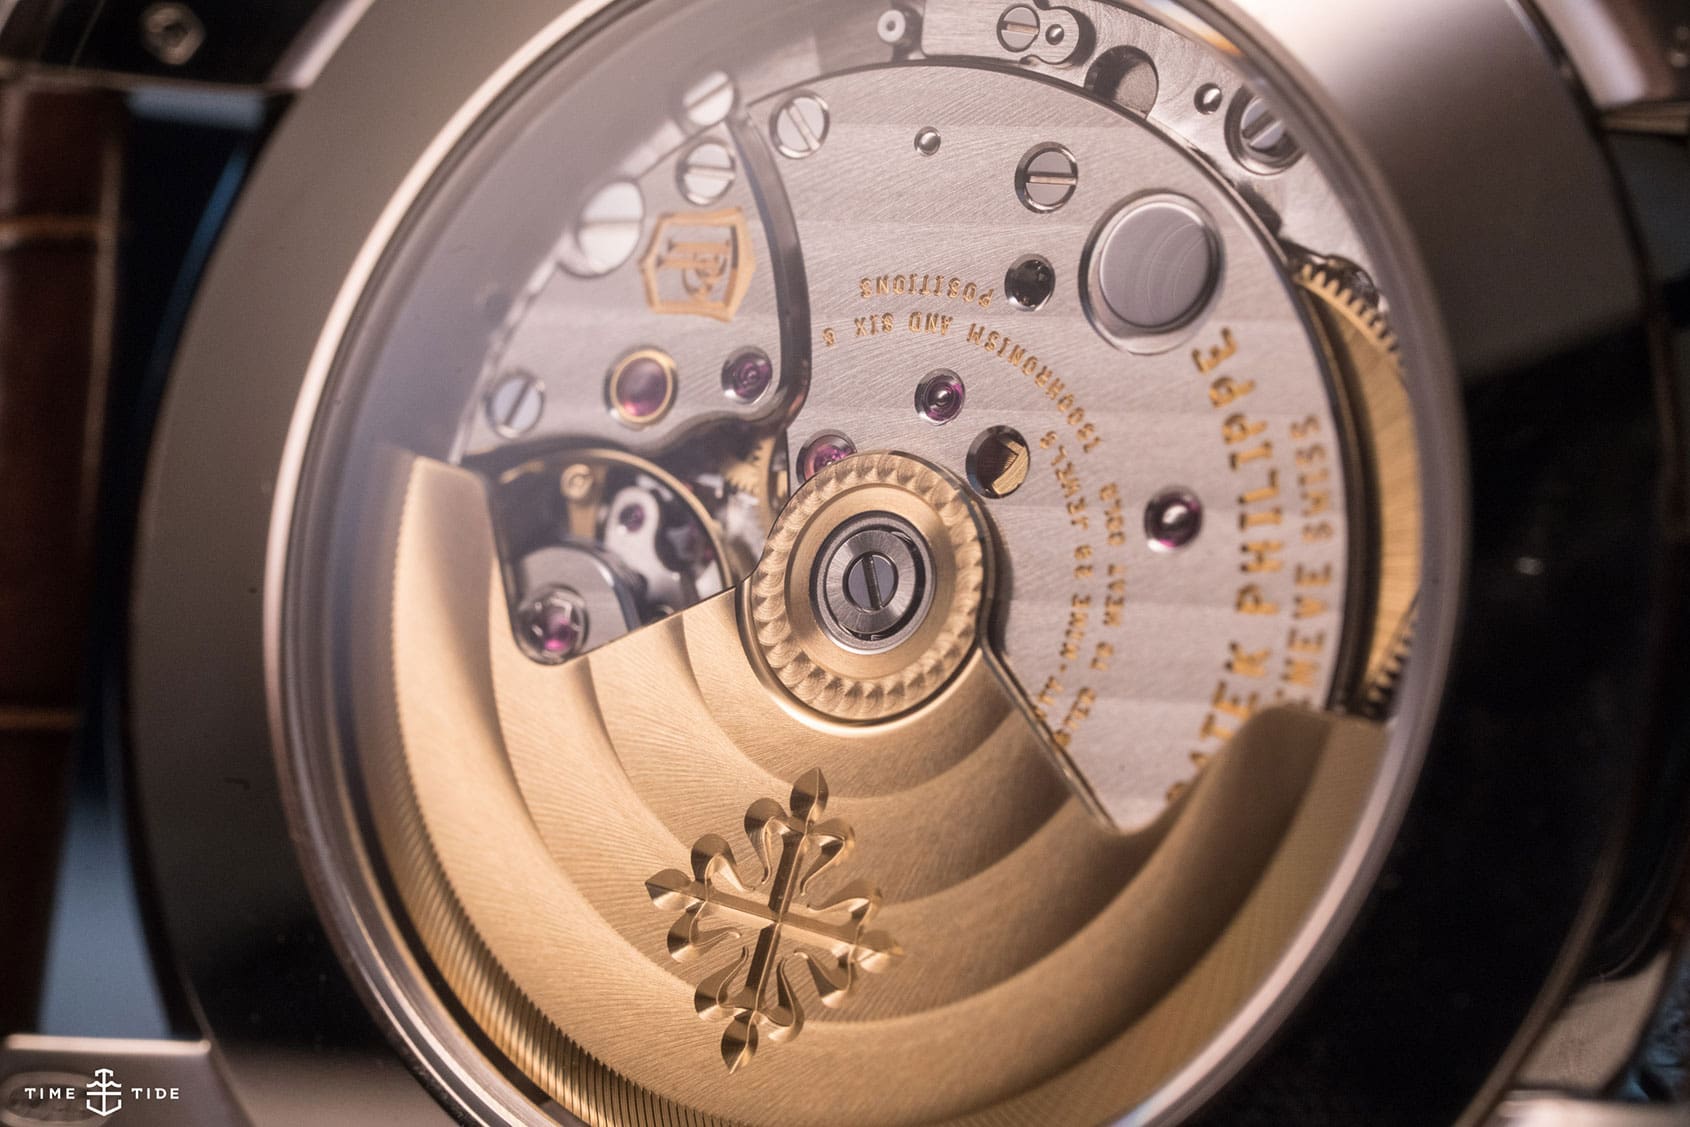 The new Grand Seiko SBGZ009 is a handsomely hand-engraved holy grail